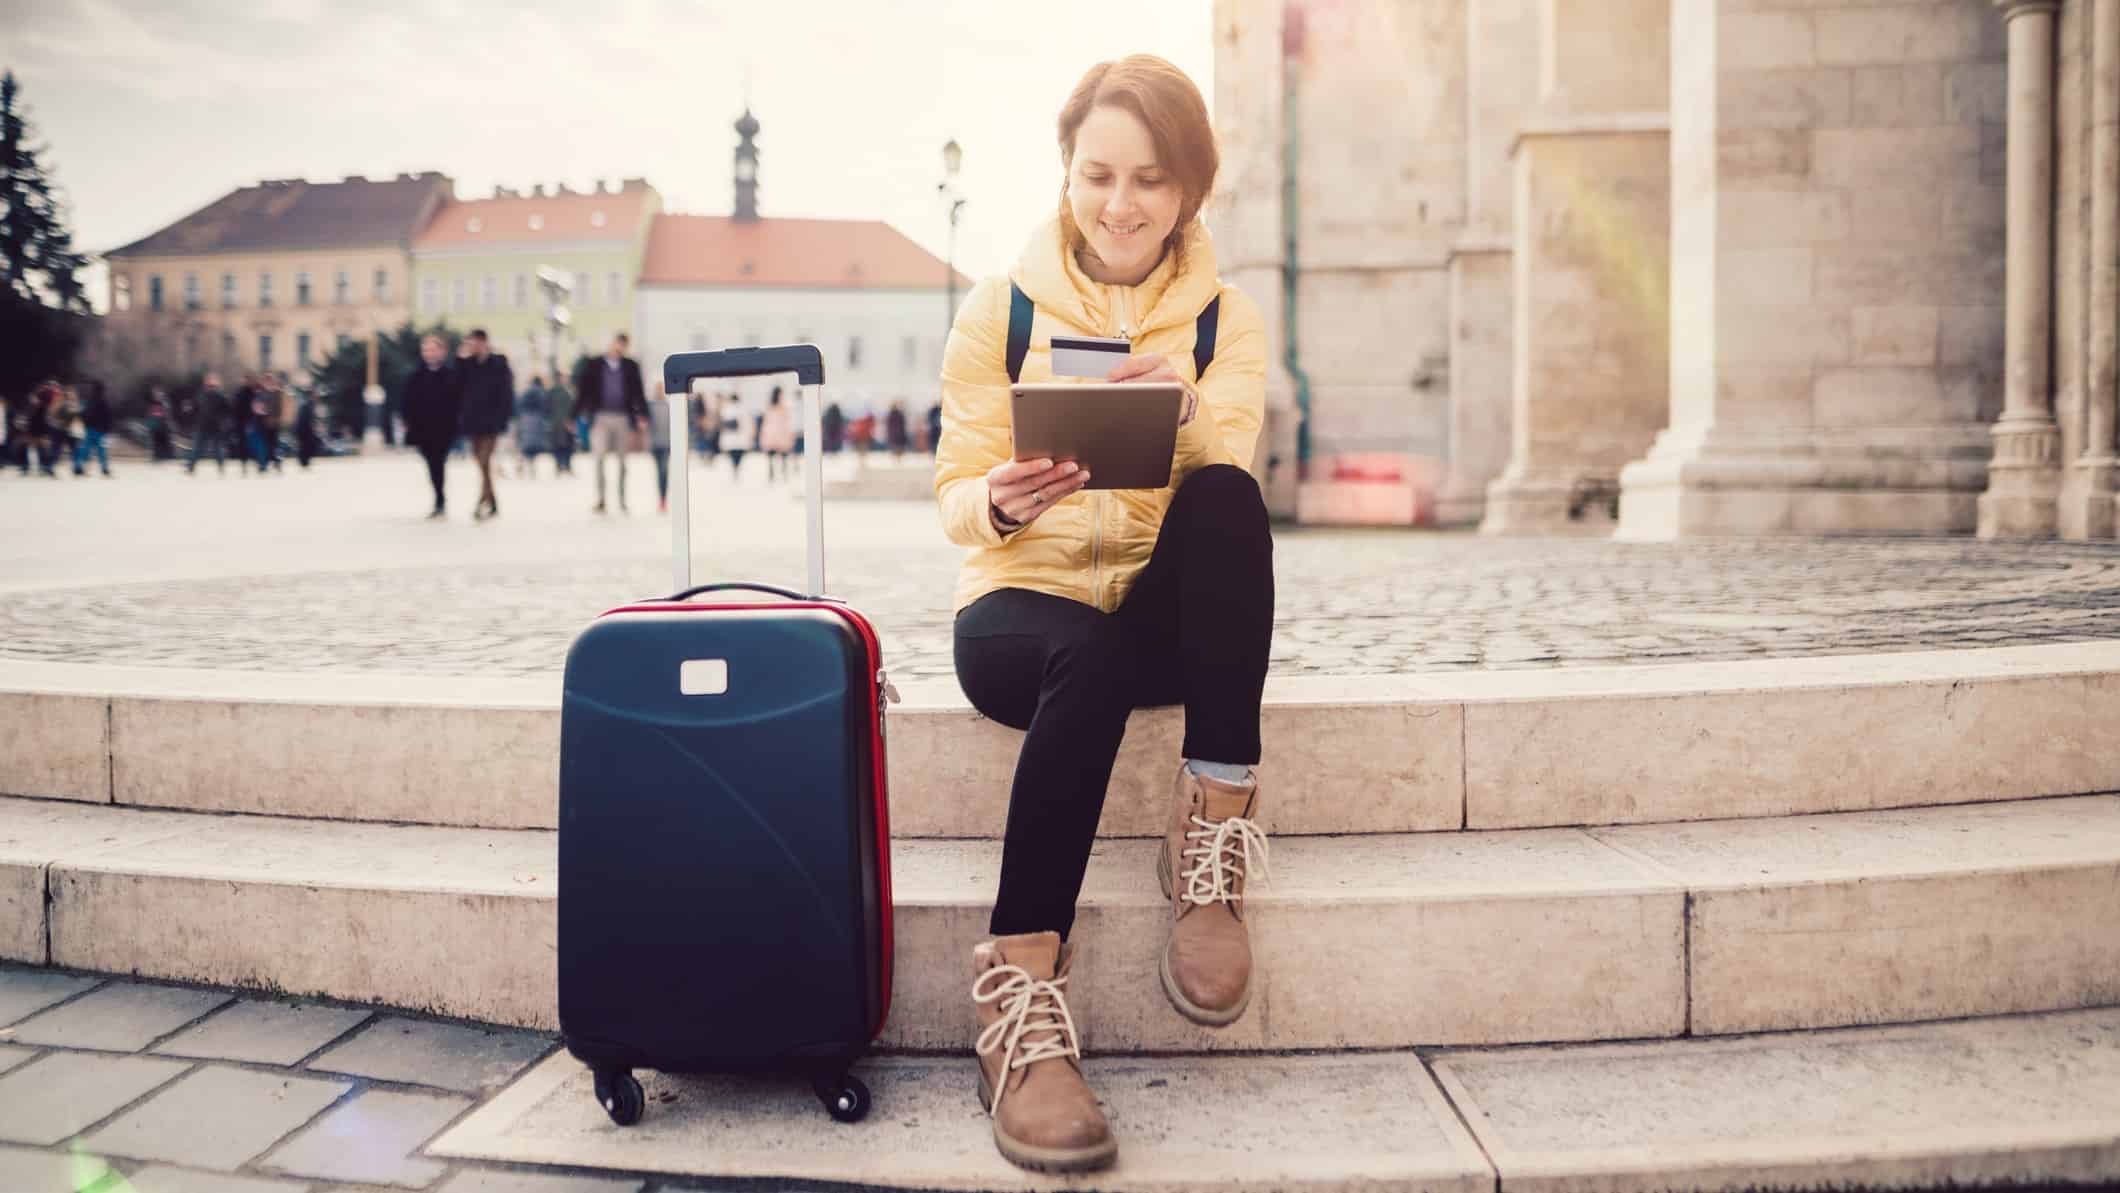 A young woman makes an online travel booking as she sits on some steps with her suitcase next to her.